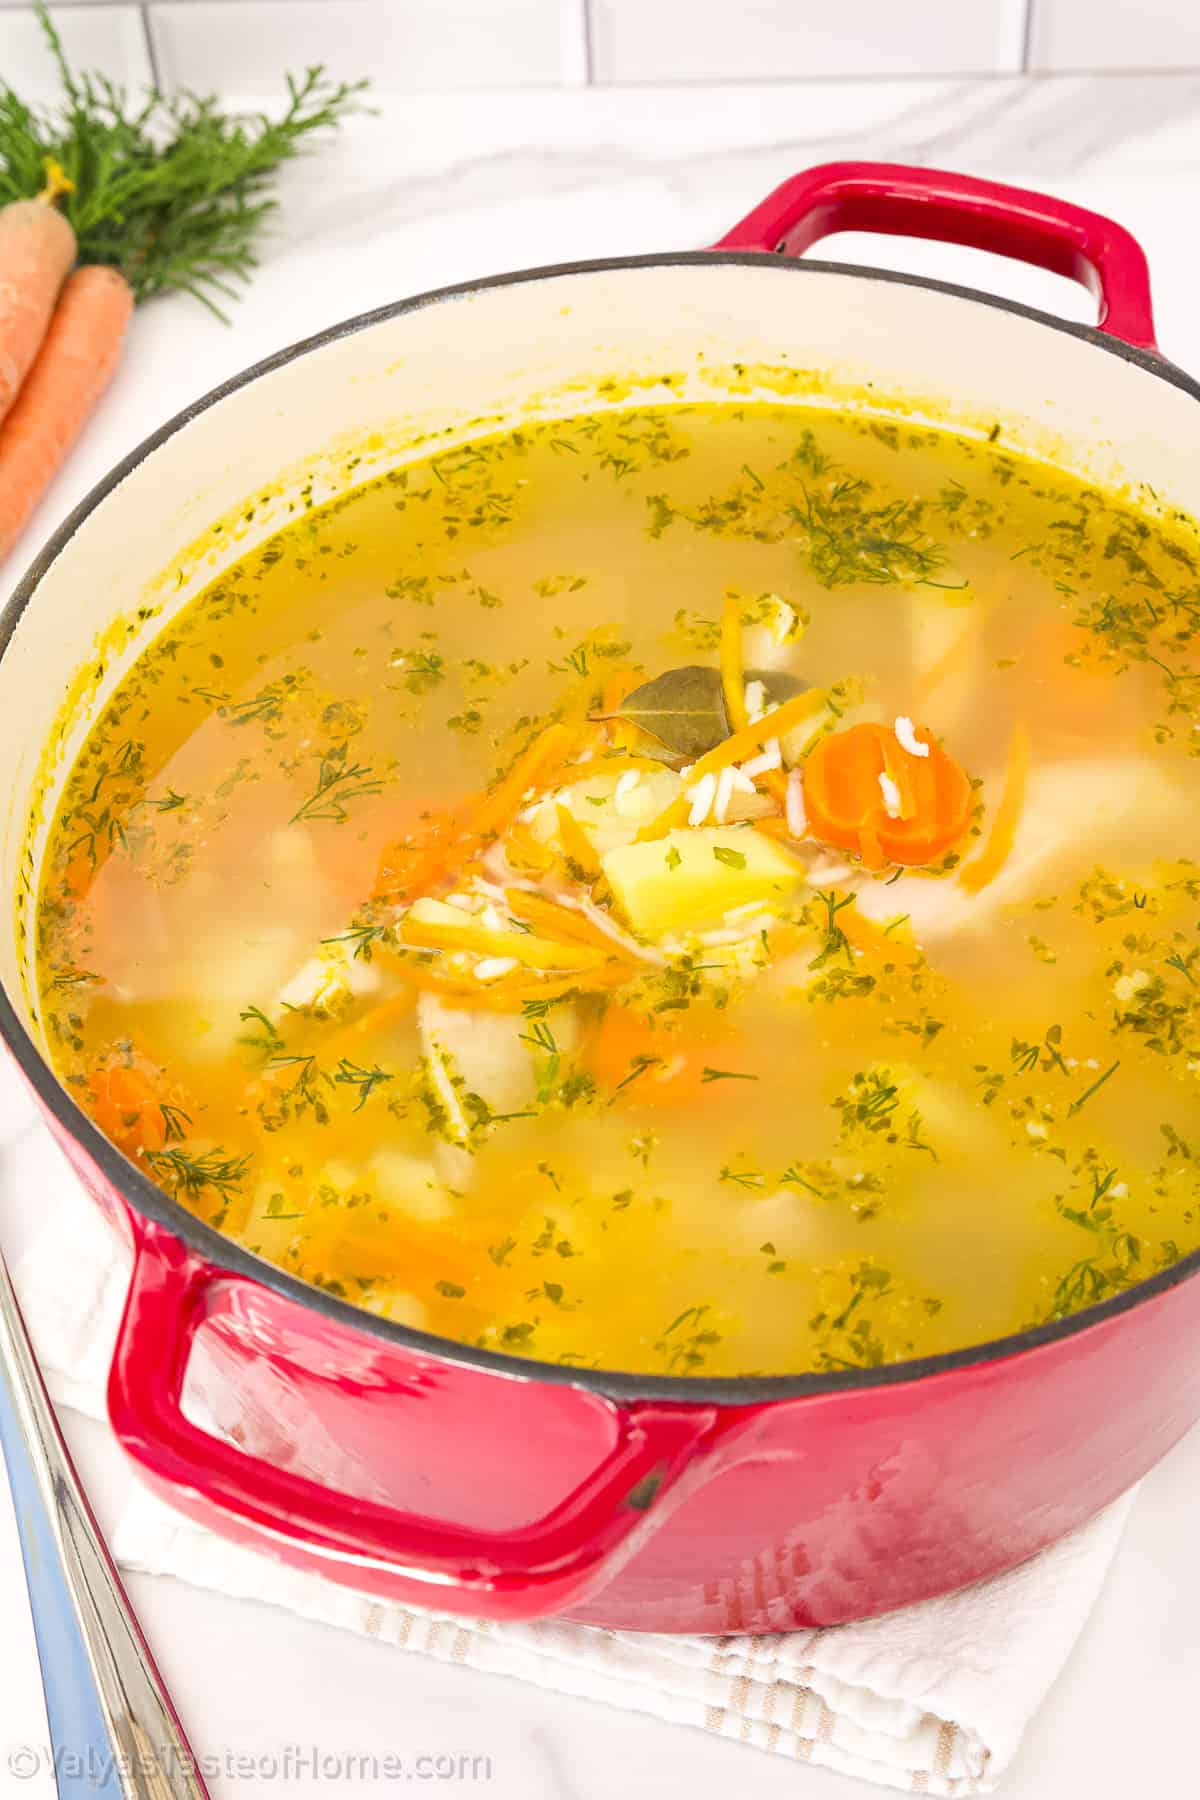 Take advantage of your holiday extras by using your leftover turkey to make this delicious Leftover Turkey Soup! It's heartwarming and truly comforting.